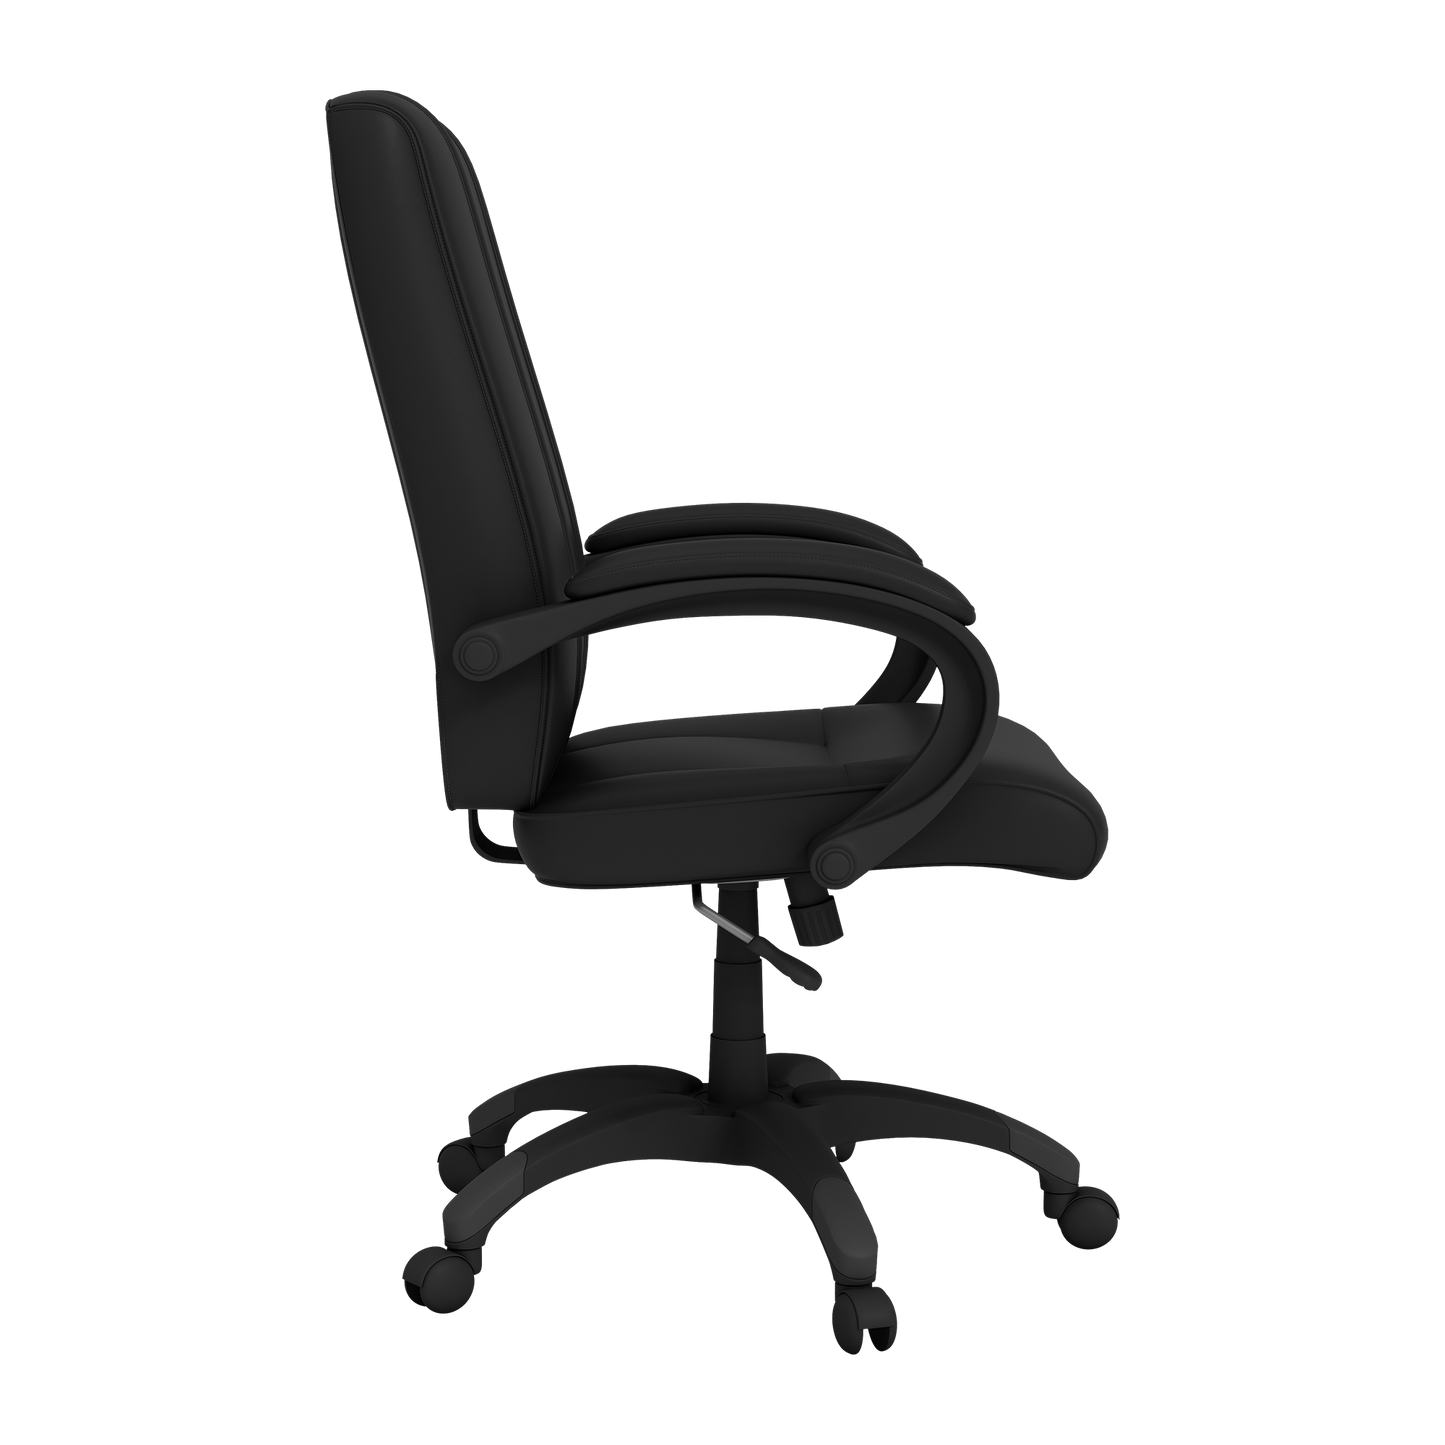 Office Chair 1000 with Nashville SC Logo